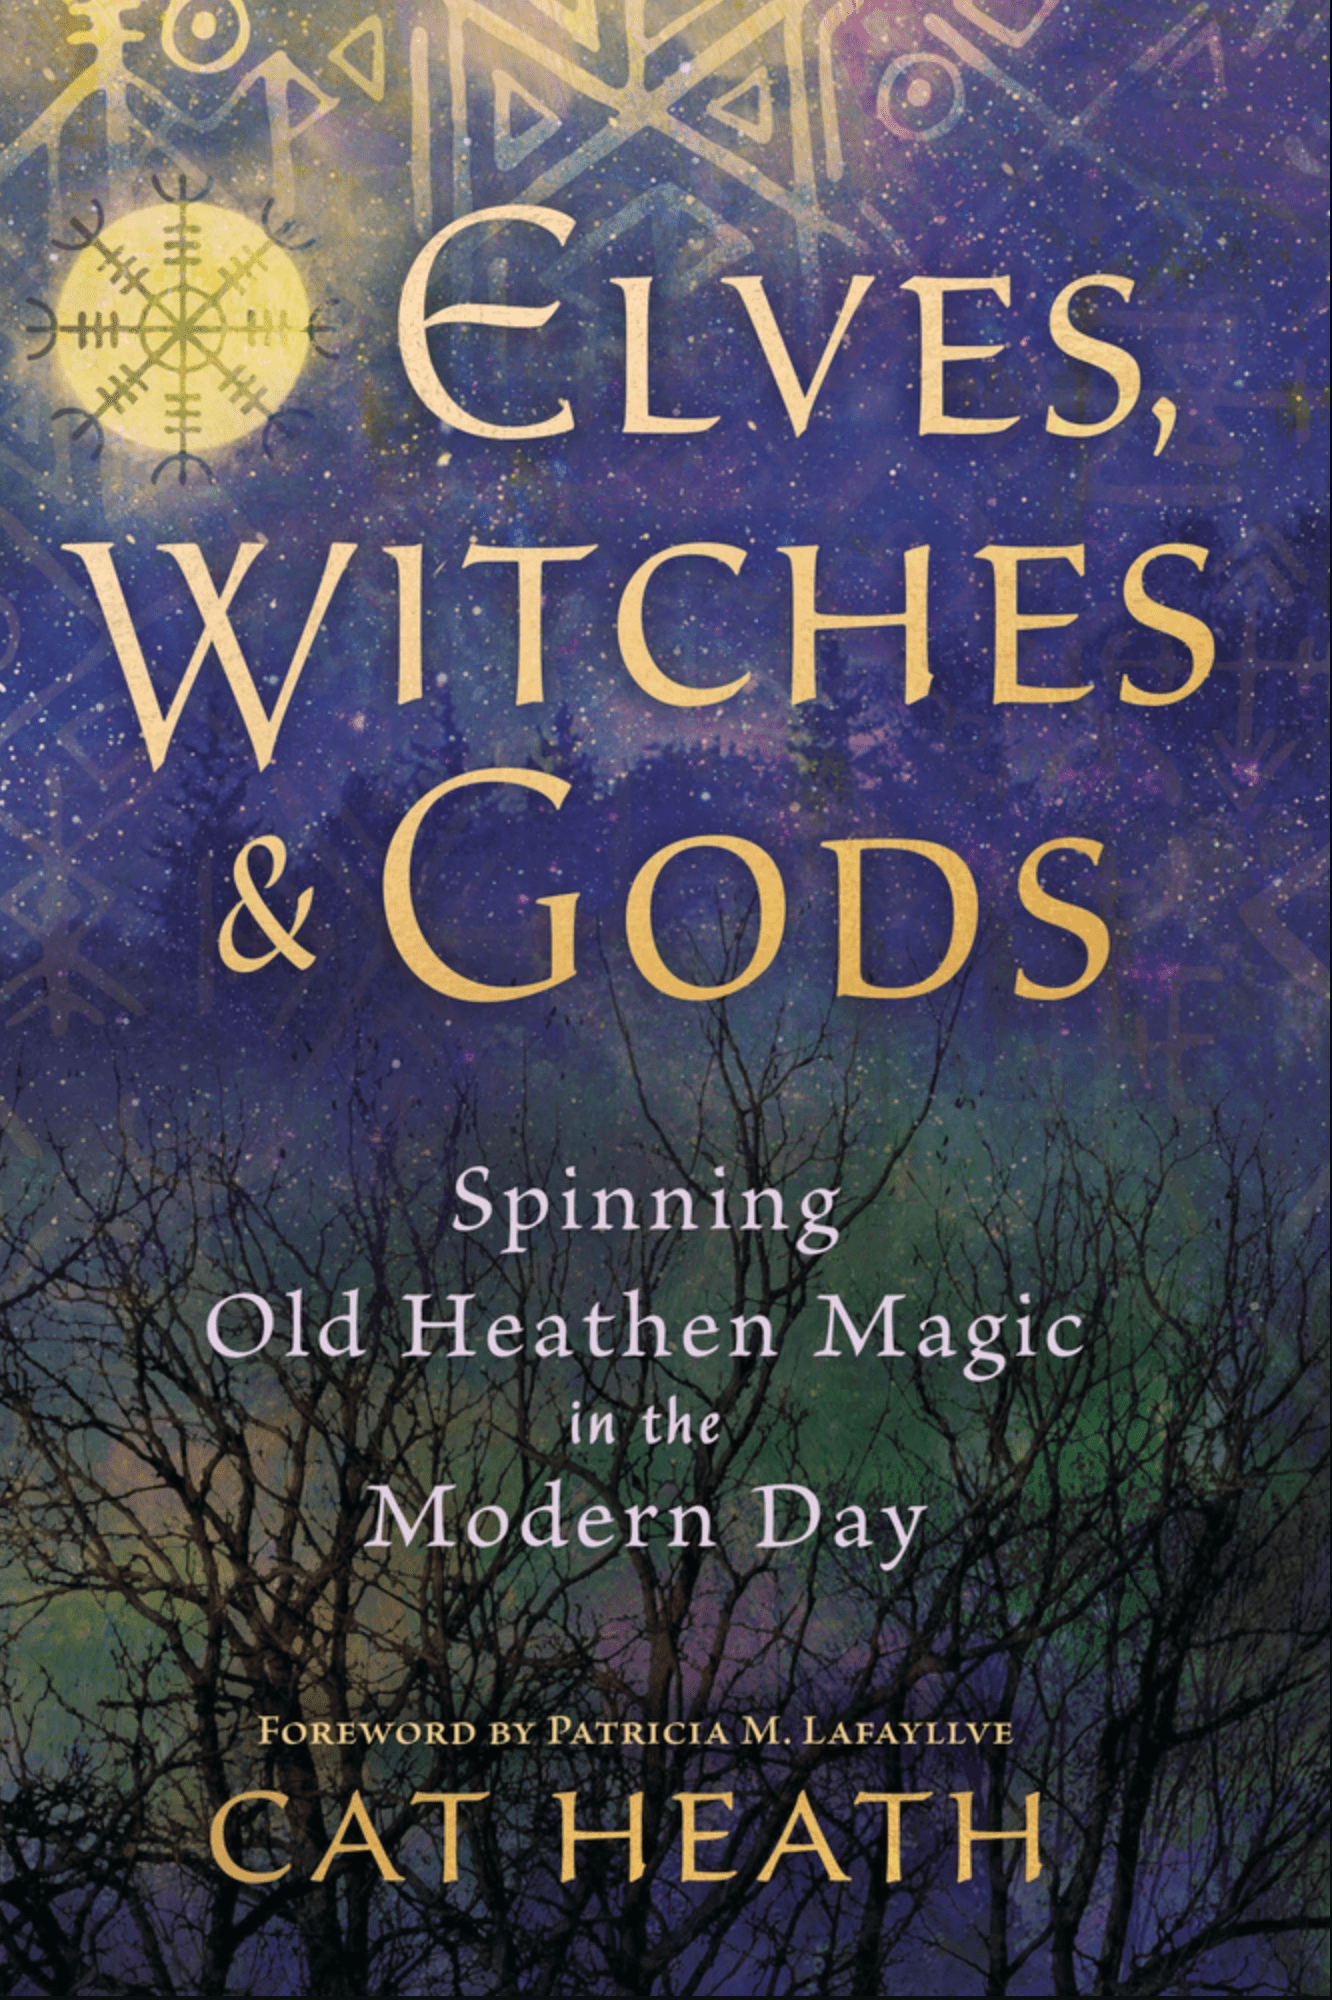 Elves, Witches & Gods | Spinning Old Heathen Magic into the Modern Day - Spiral Circle